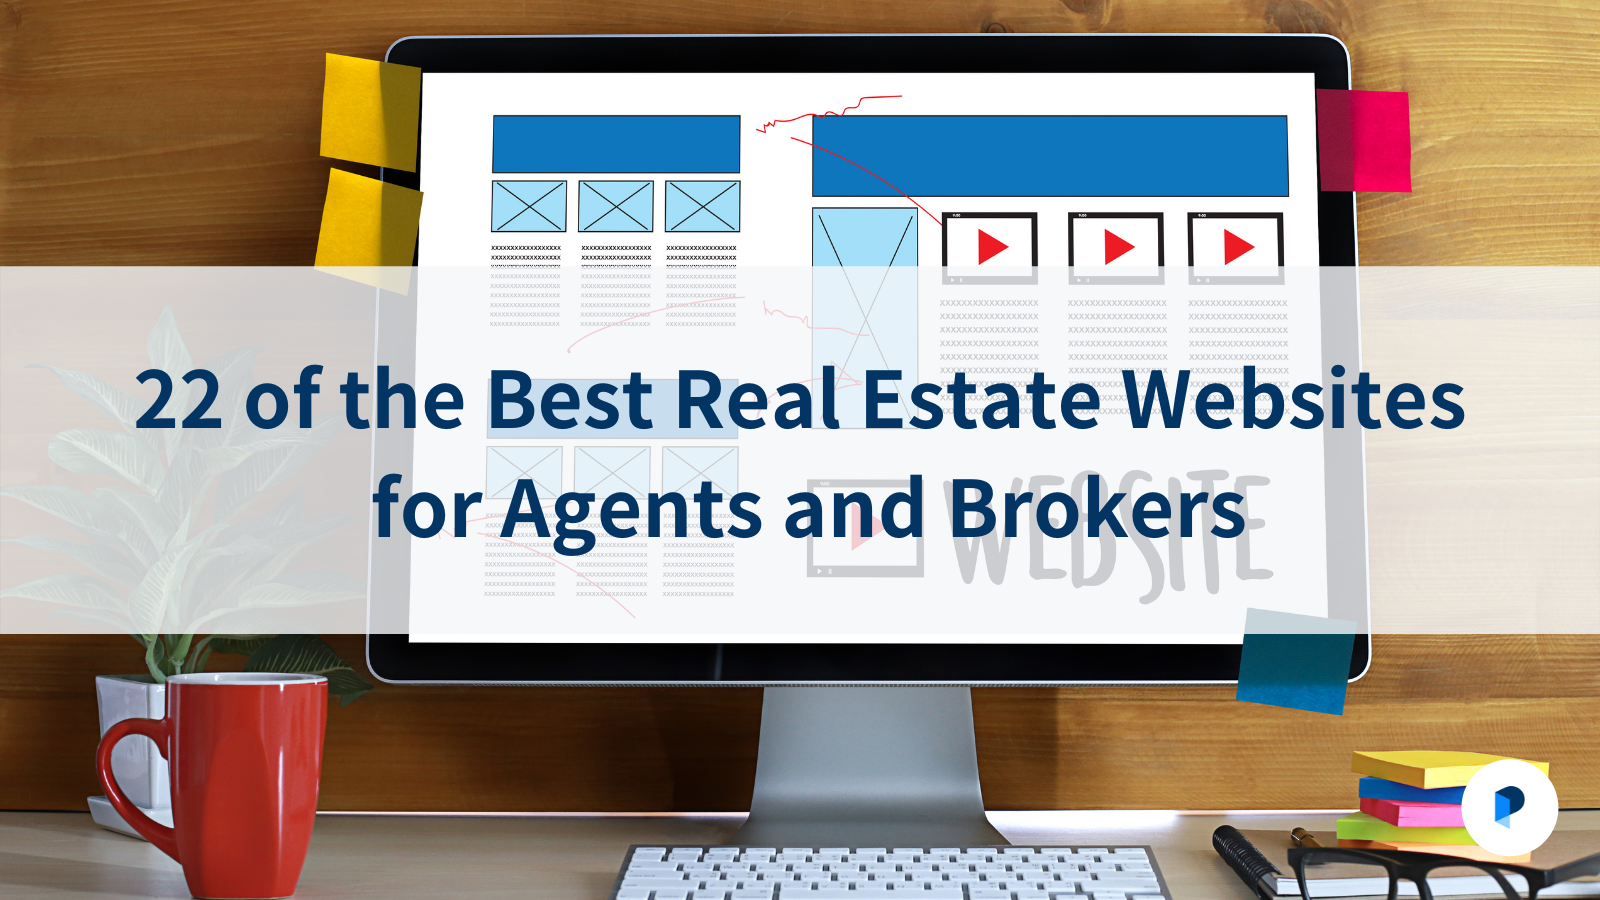 22 of the Best Real Estate Websites for Agents and Brokers